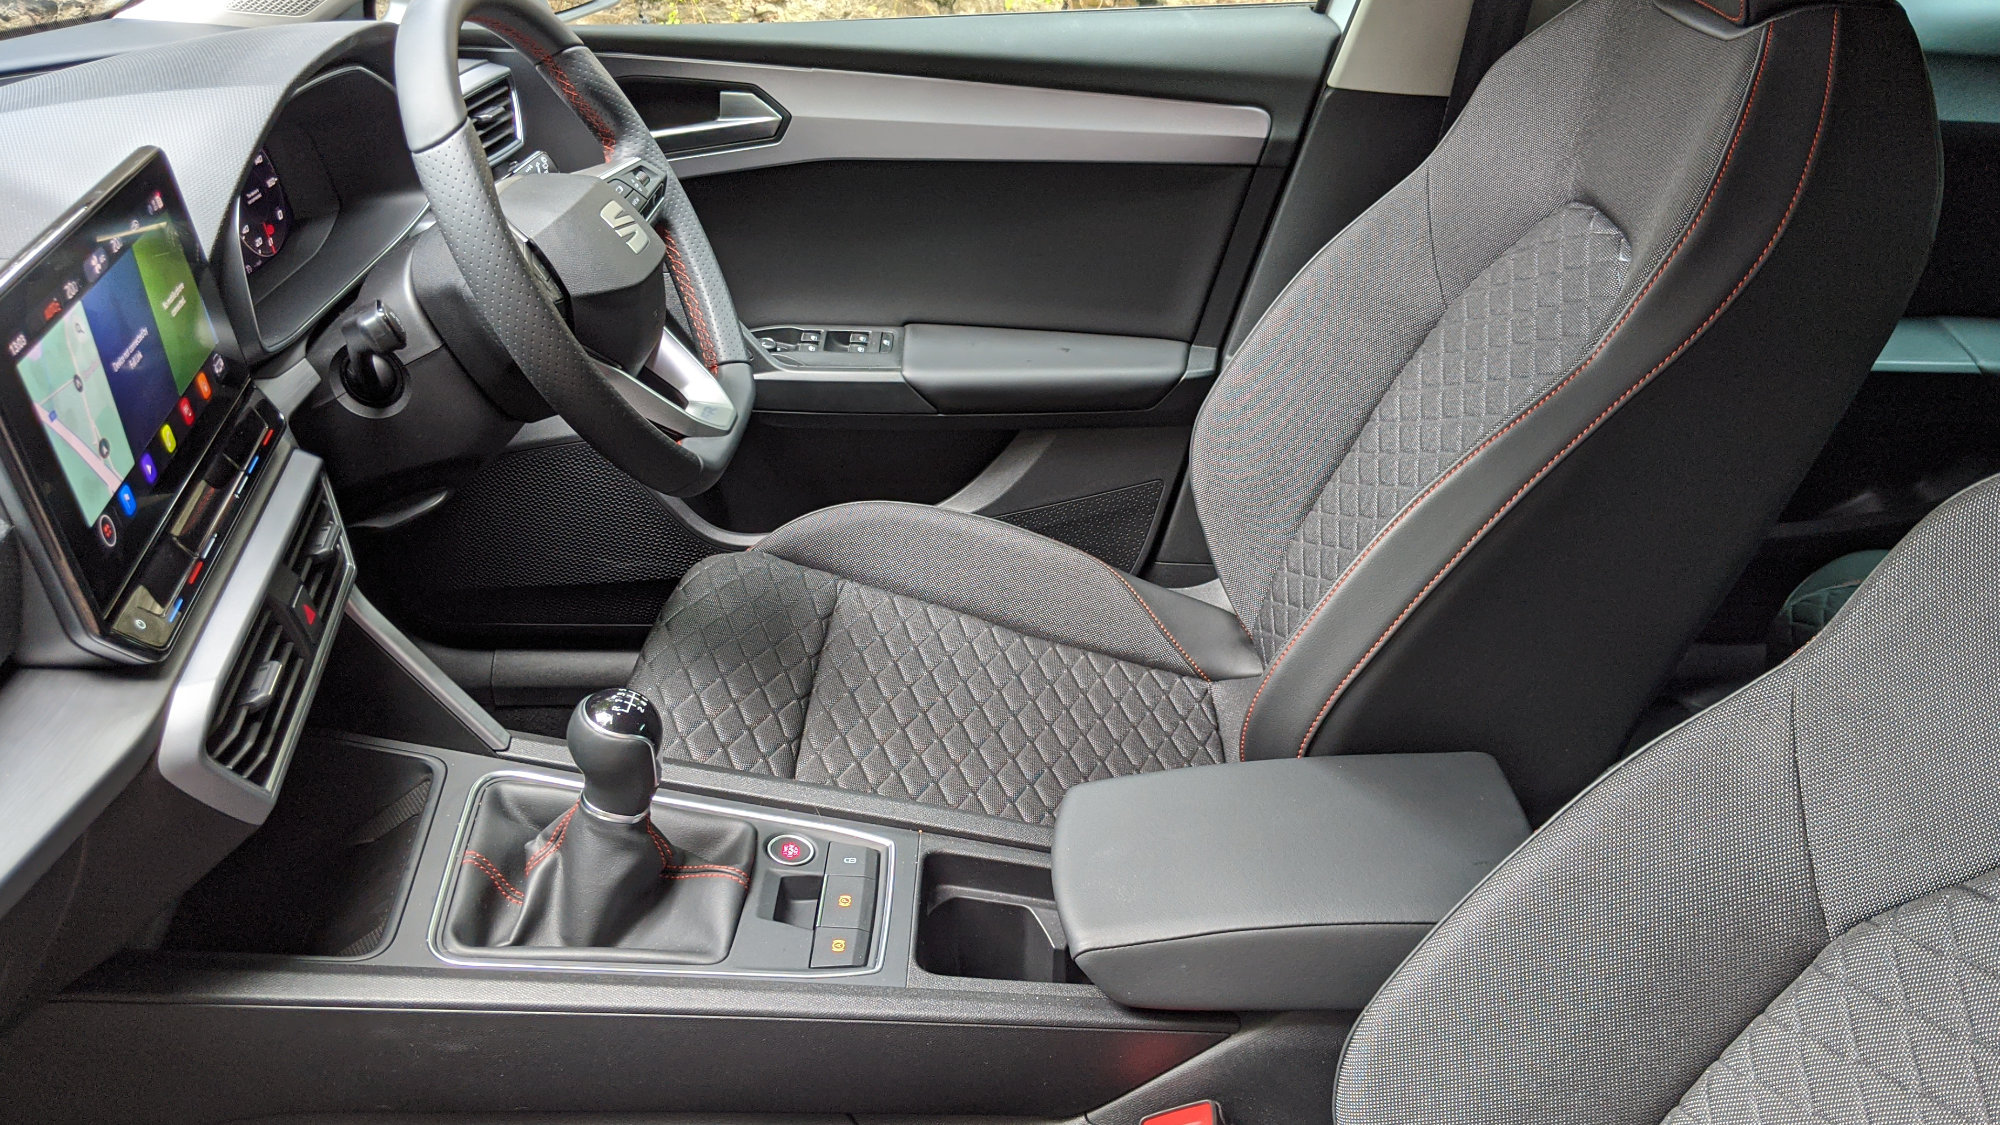 2020 SEAT Leon Videos Detail The All-New Design Inside And Out